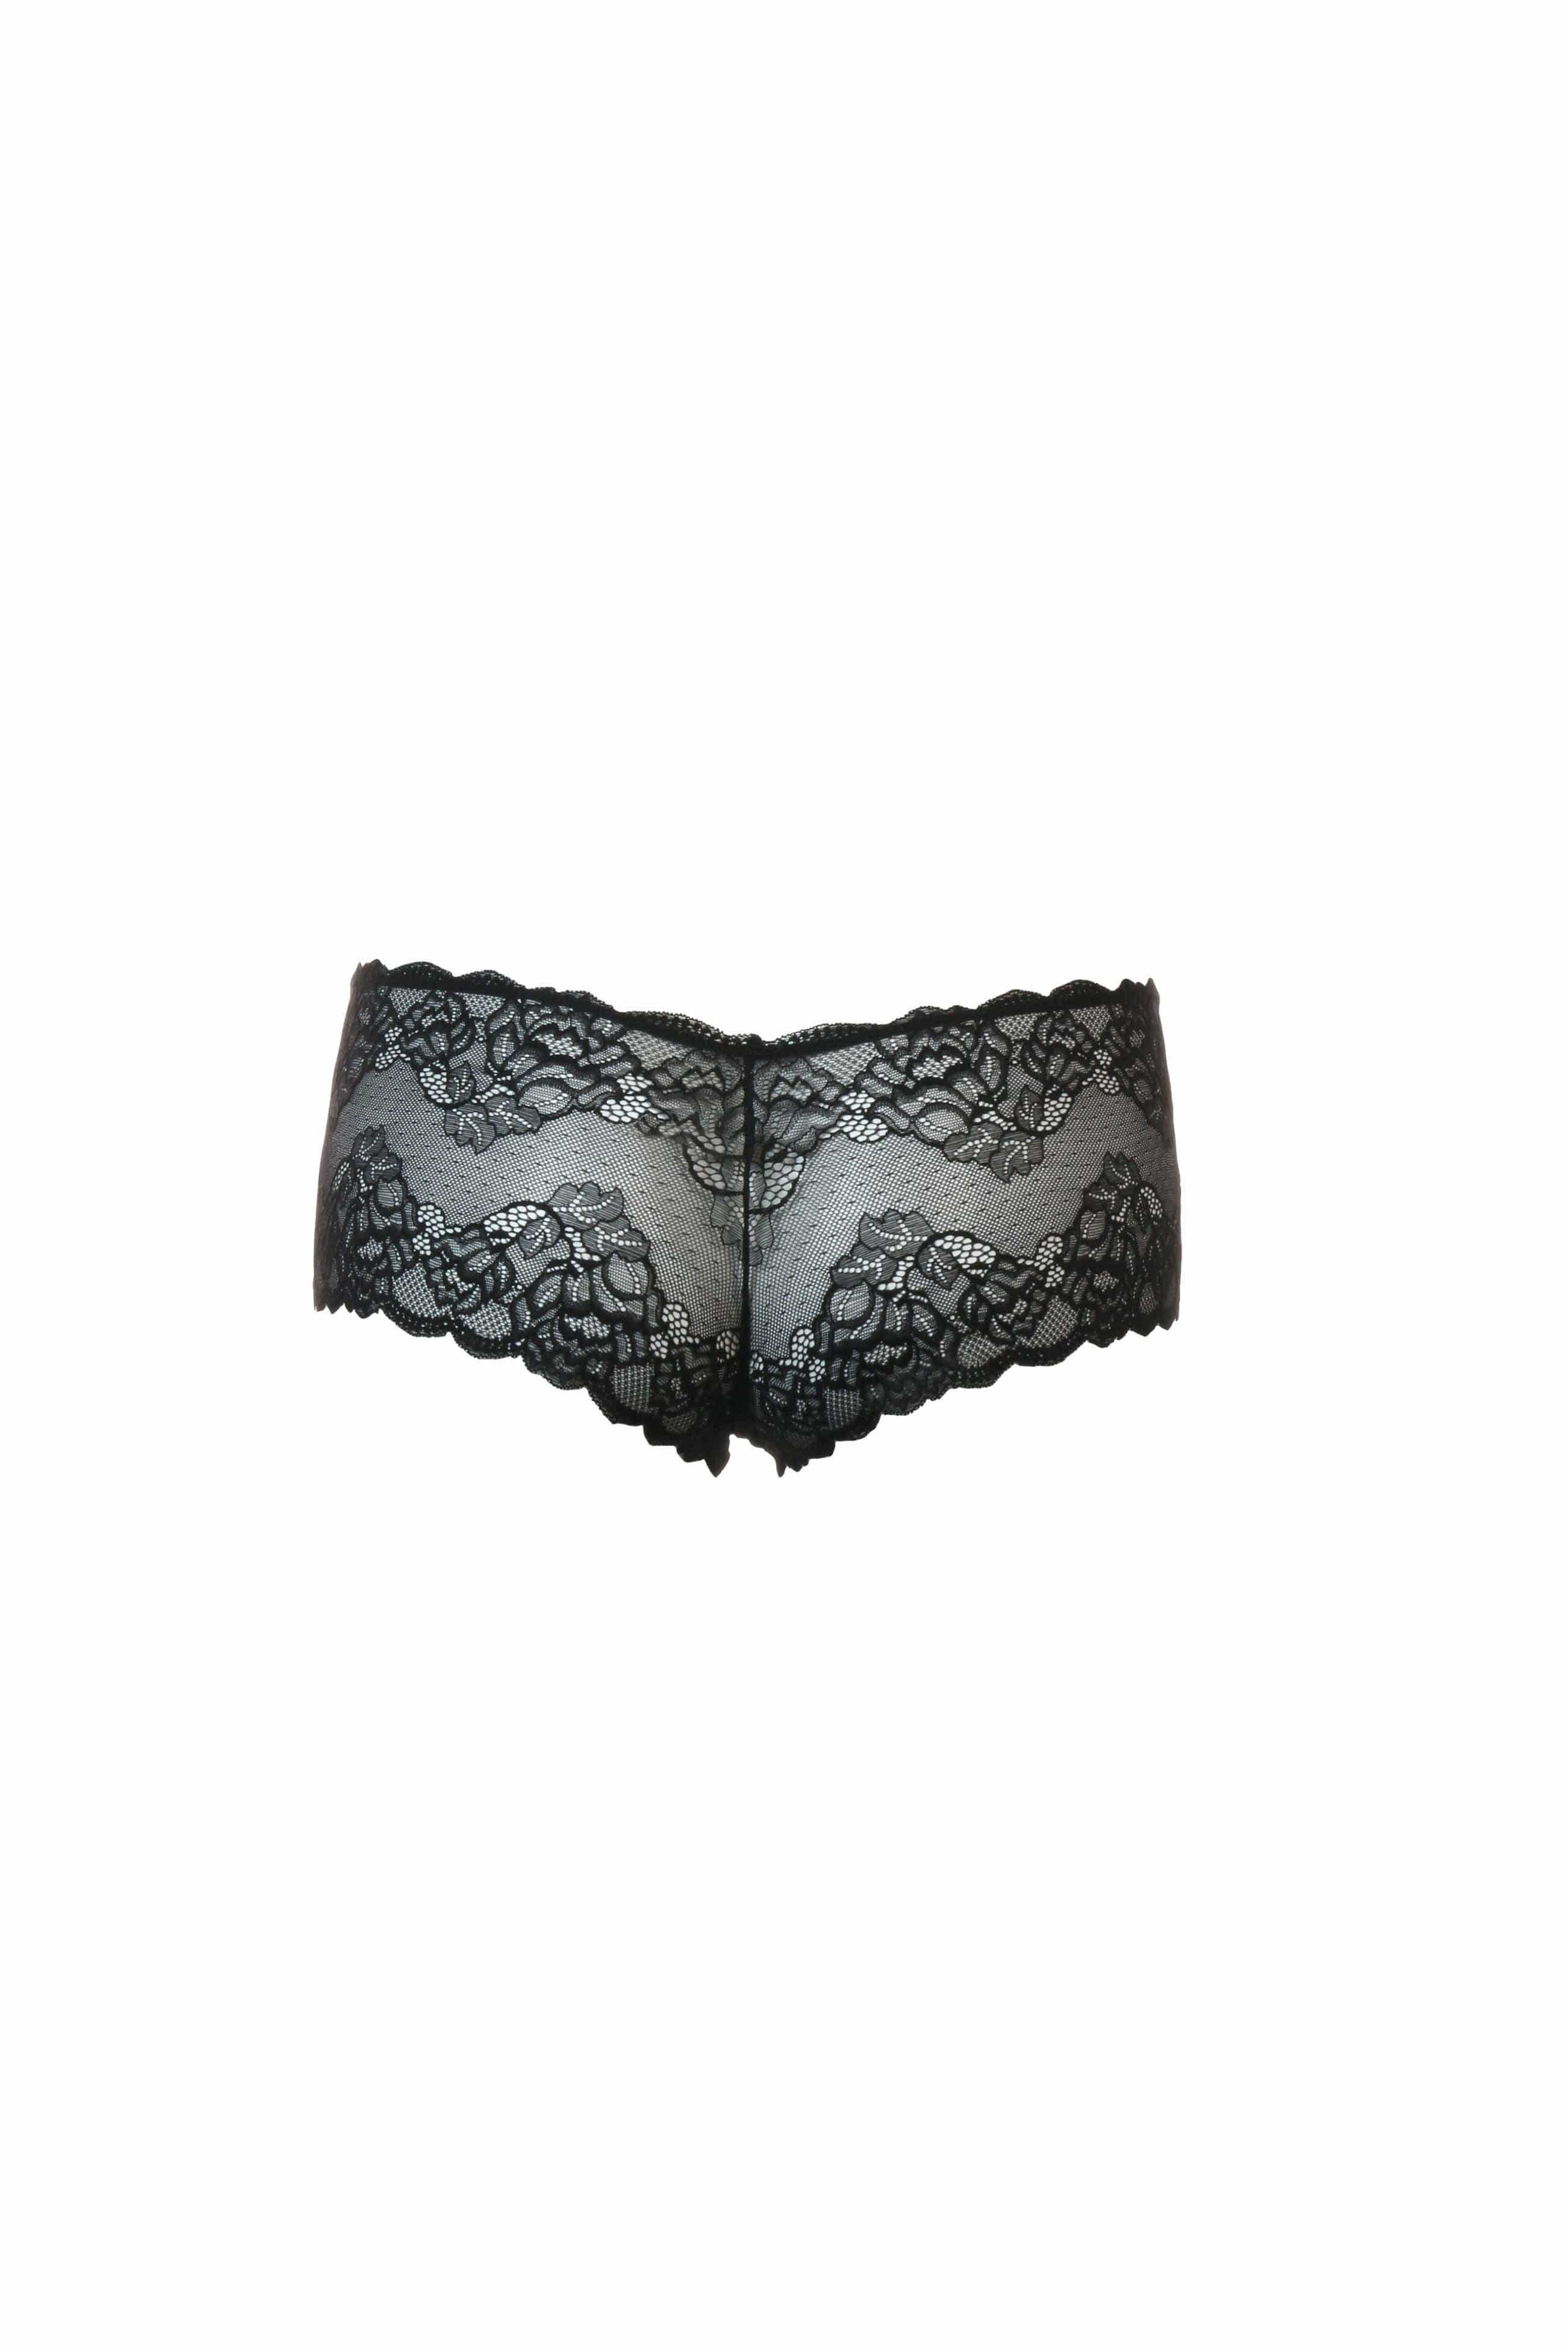 Ardene 3-Pack of Lace Cheeky Panties in Black, Size, Nylon/Spandex